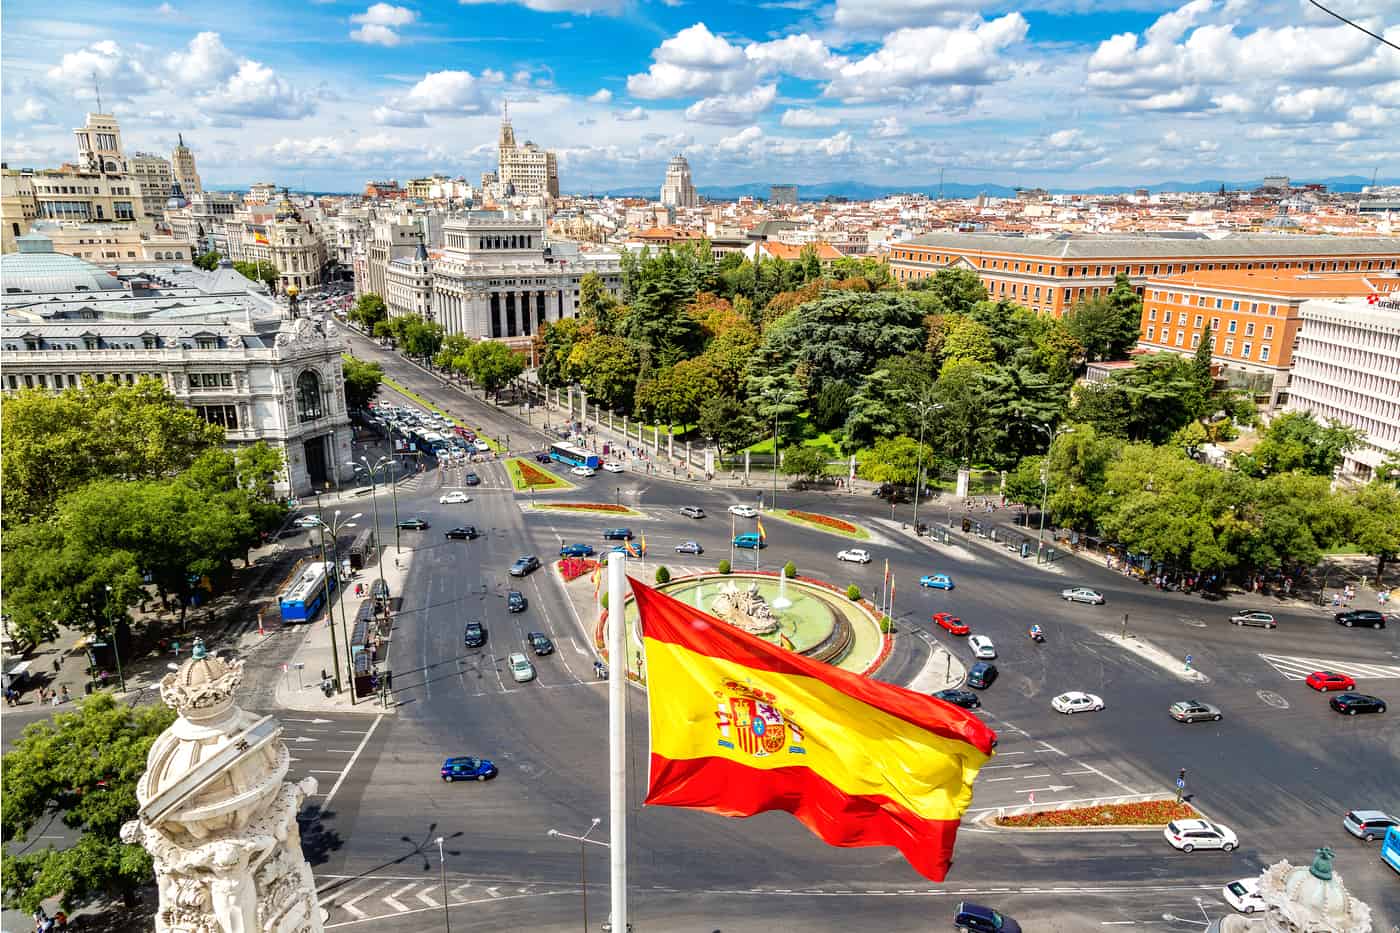 An aerial view of Cibeles Fountain and a large roundabout in the centre of Madrid. In the foreground, a Spanish flag blows in the wind. In the distance, the city stretches out towards the mountains.